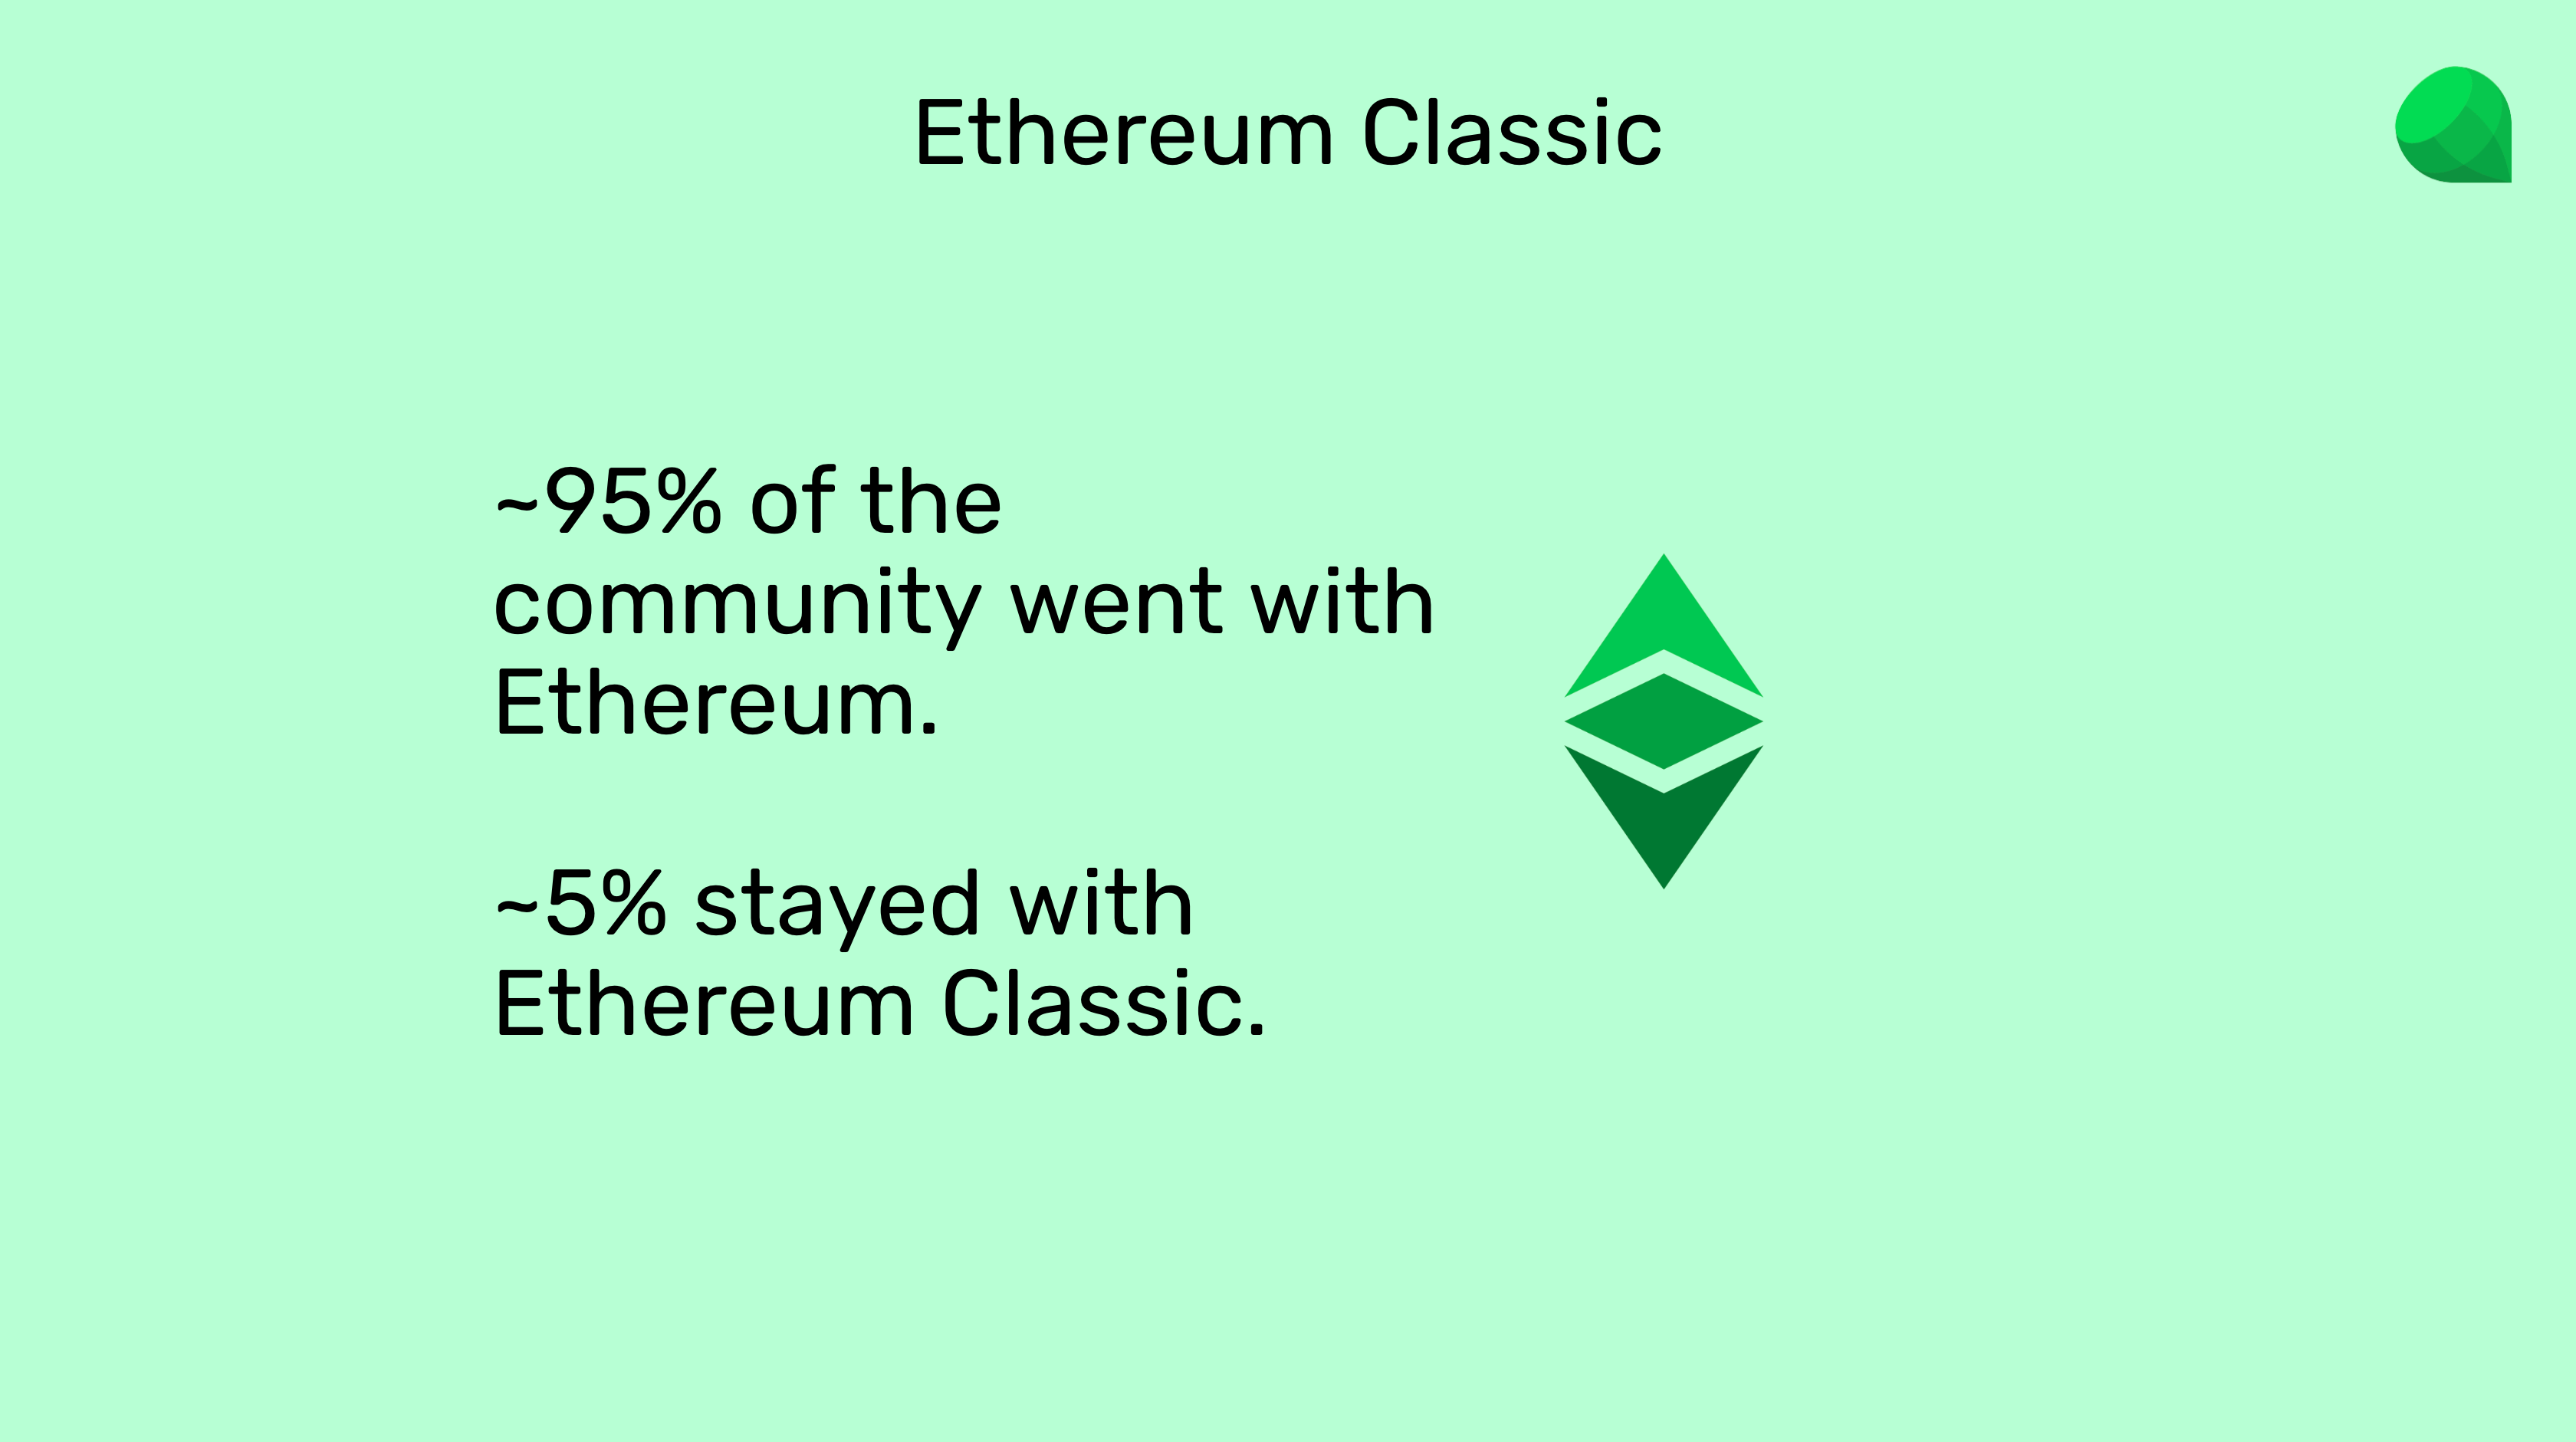 95% went with ETH and 5% with ETC.